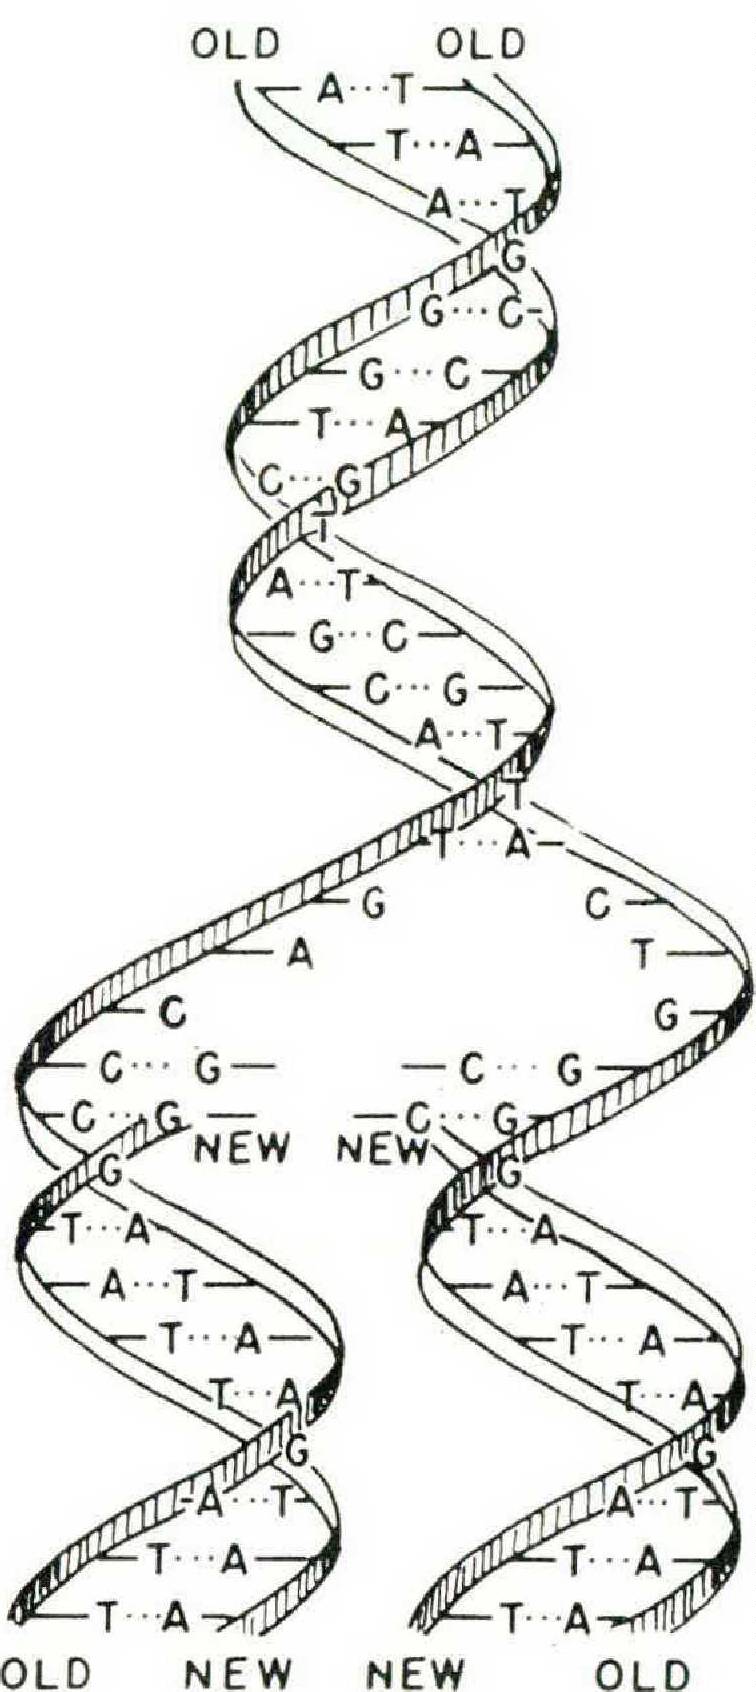 The Double Helix: The Discovery of the Structure of Dna - The Atlantic